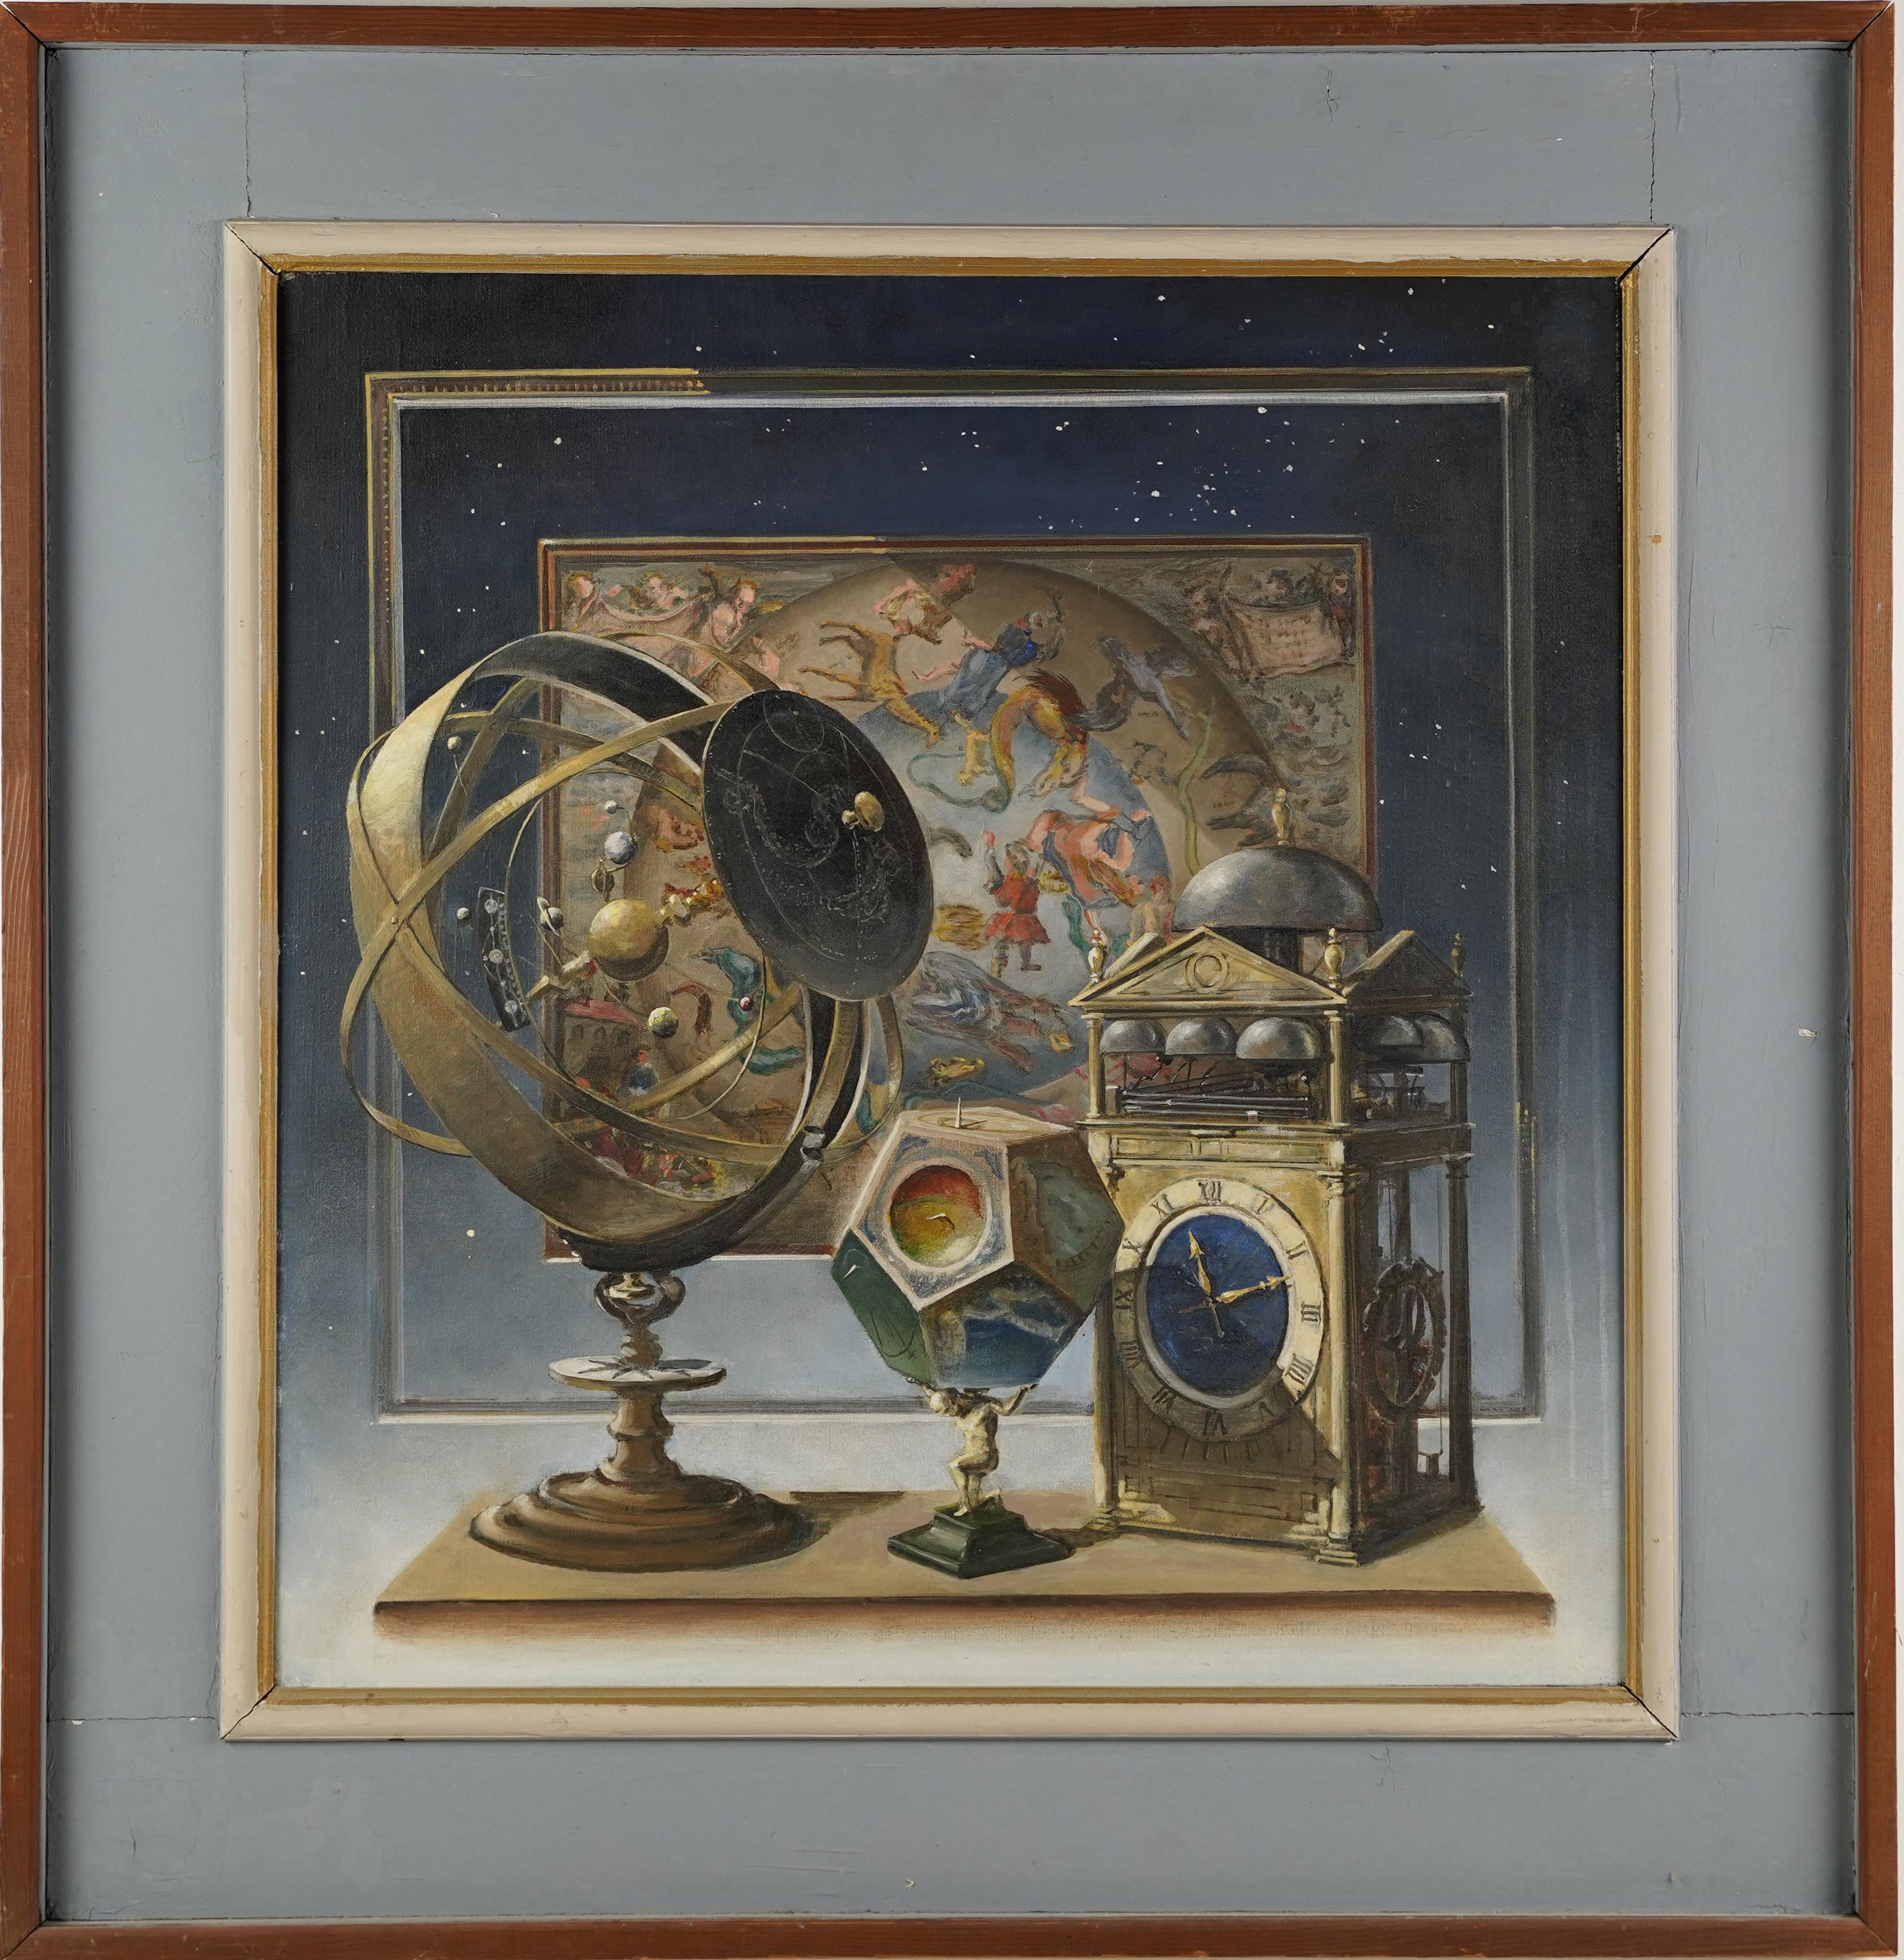 Unknown Interior Painting - Antique American School Trompe L'Oeil Astrology/Astronomy Still Life Painting